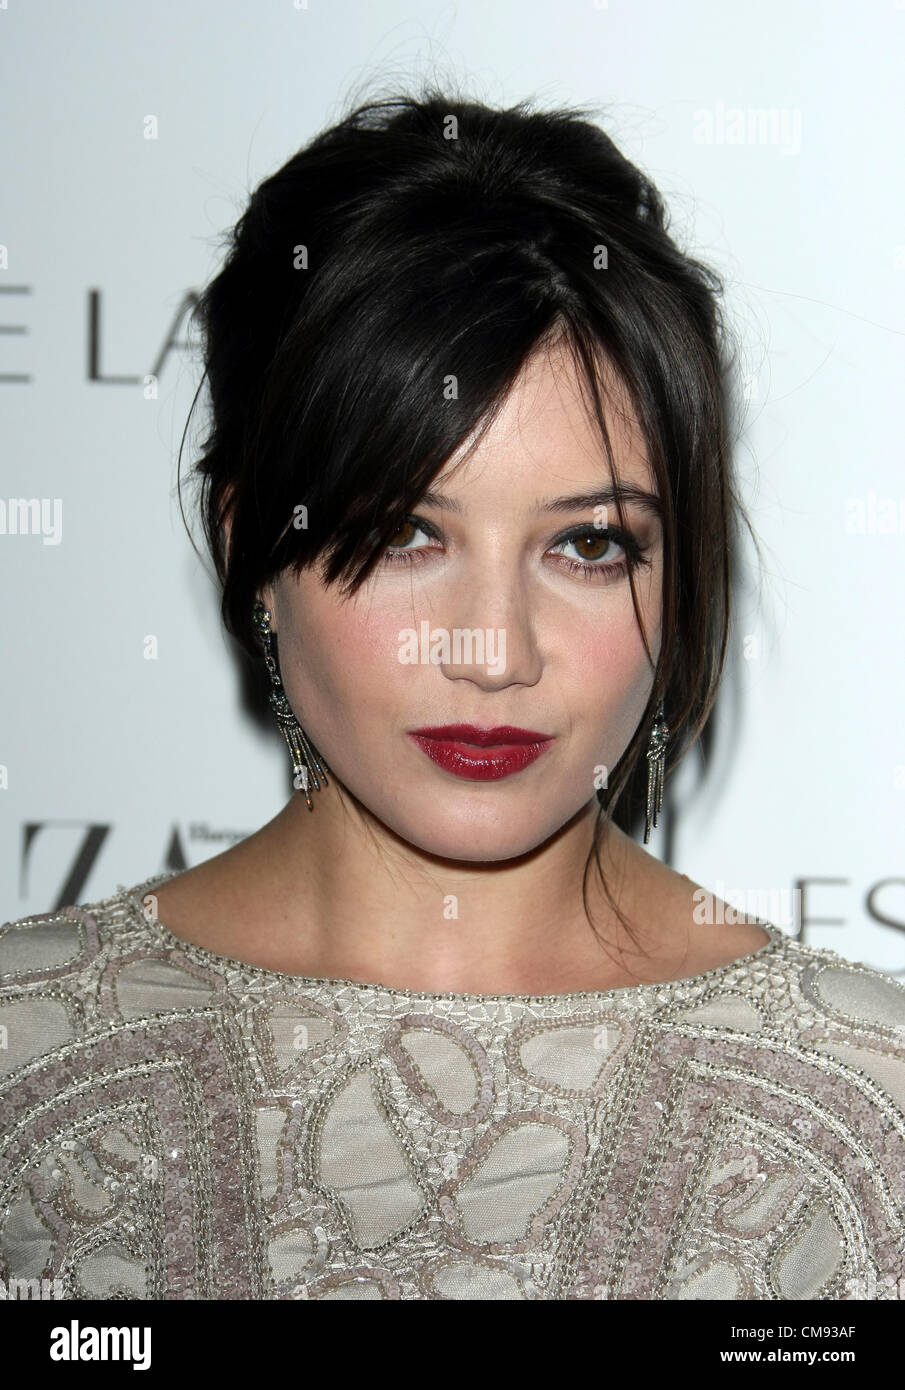 DAISY LOWE HARPER'S BAZAAR WOMEN OF THE YEAR AWARDS LONDON ENGLAND UK 31 Octobre 2012 Banque D'Images